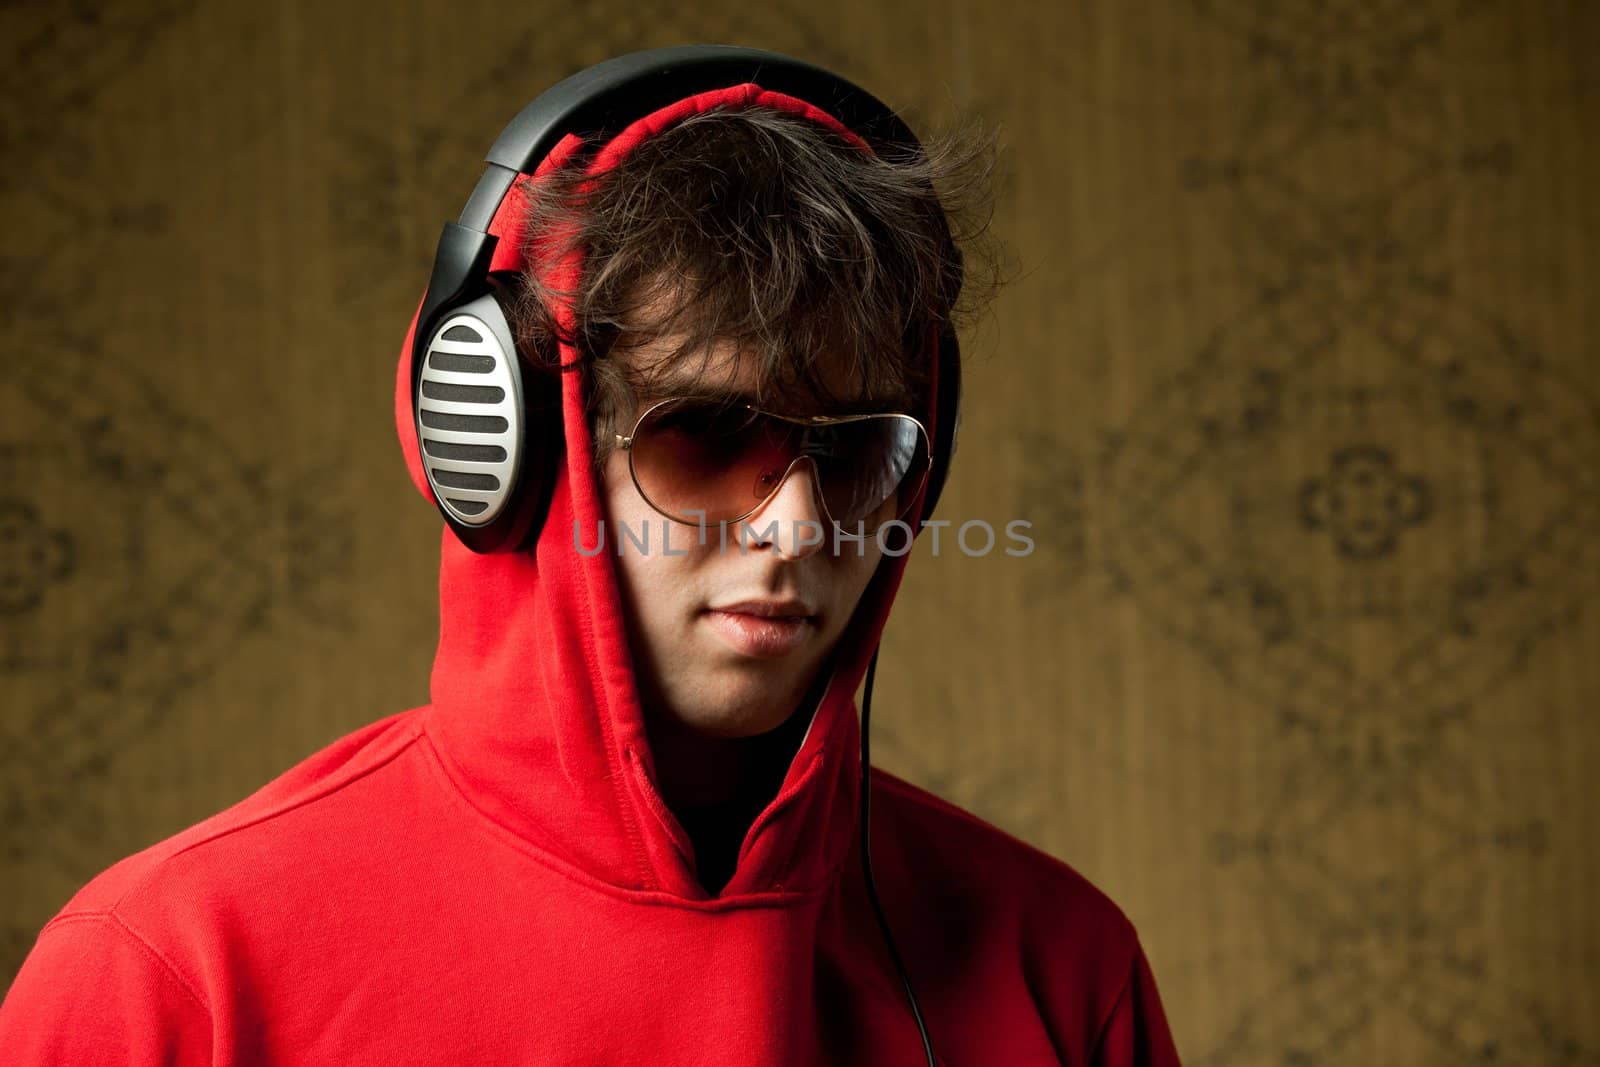 An image of a young man listening to music in headphones